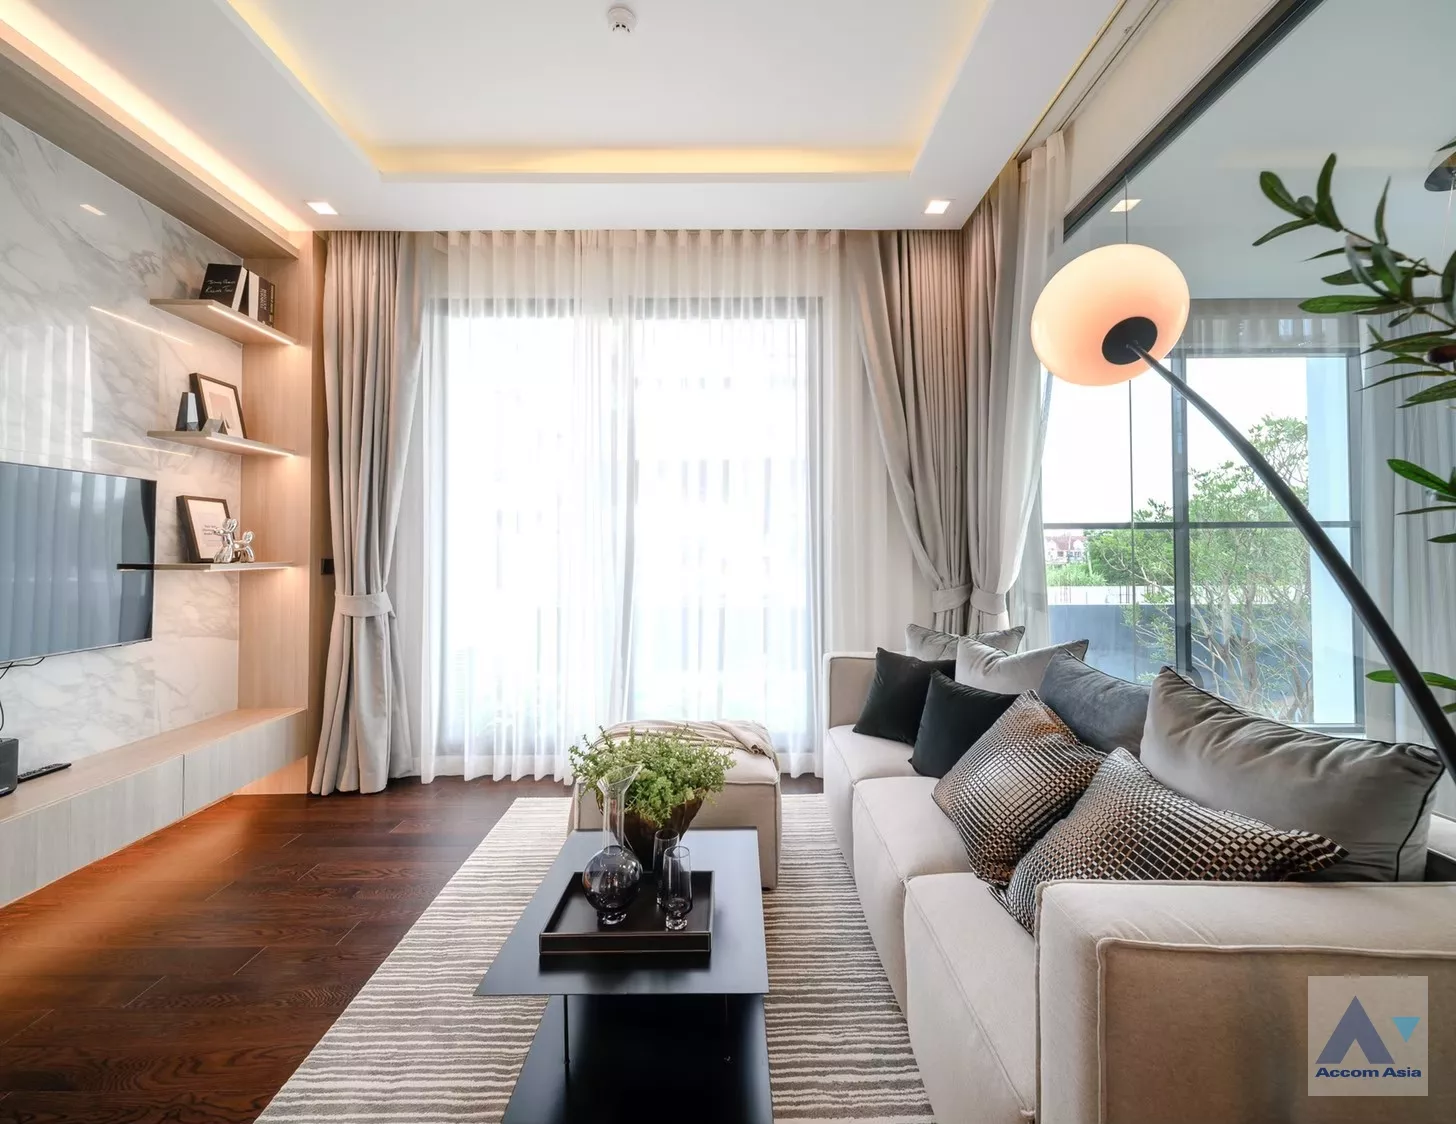  1  4 br House For Sale in Ratchadapisek ,Bangkok  at The Gentry Kaset Nawamin AA35214